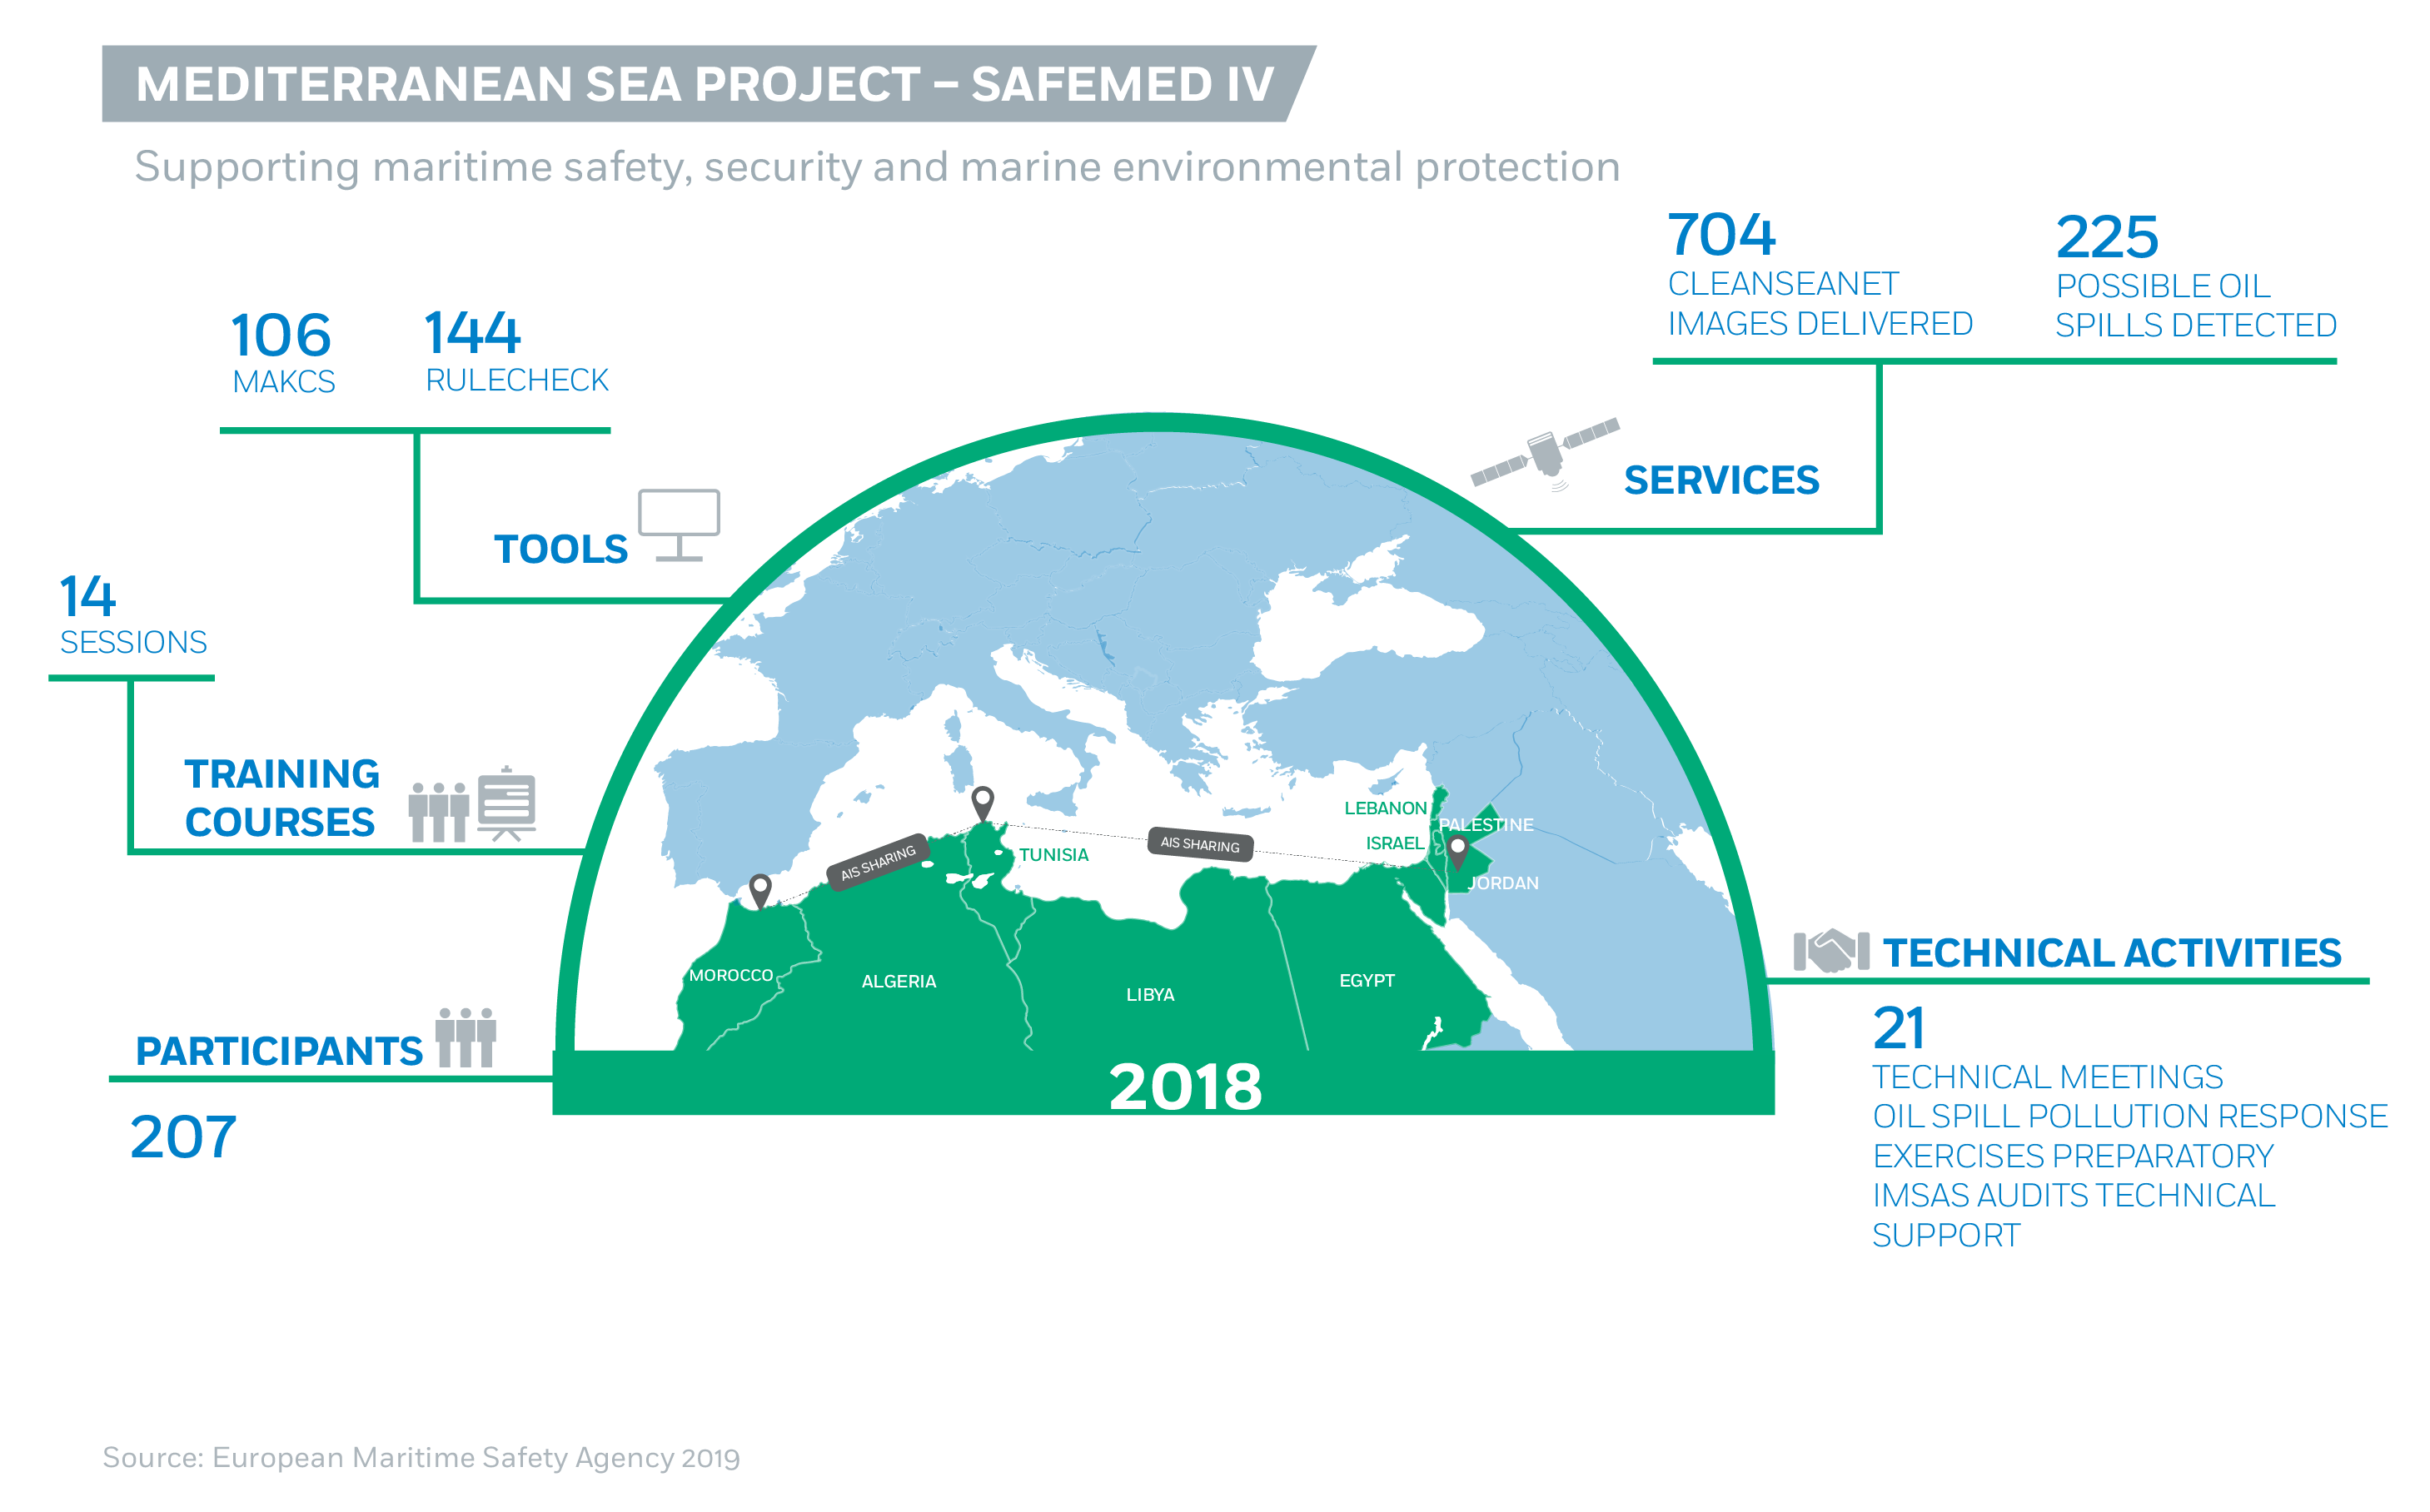 Infographic: SafeMed Project IV 2018 results